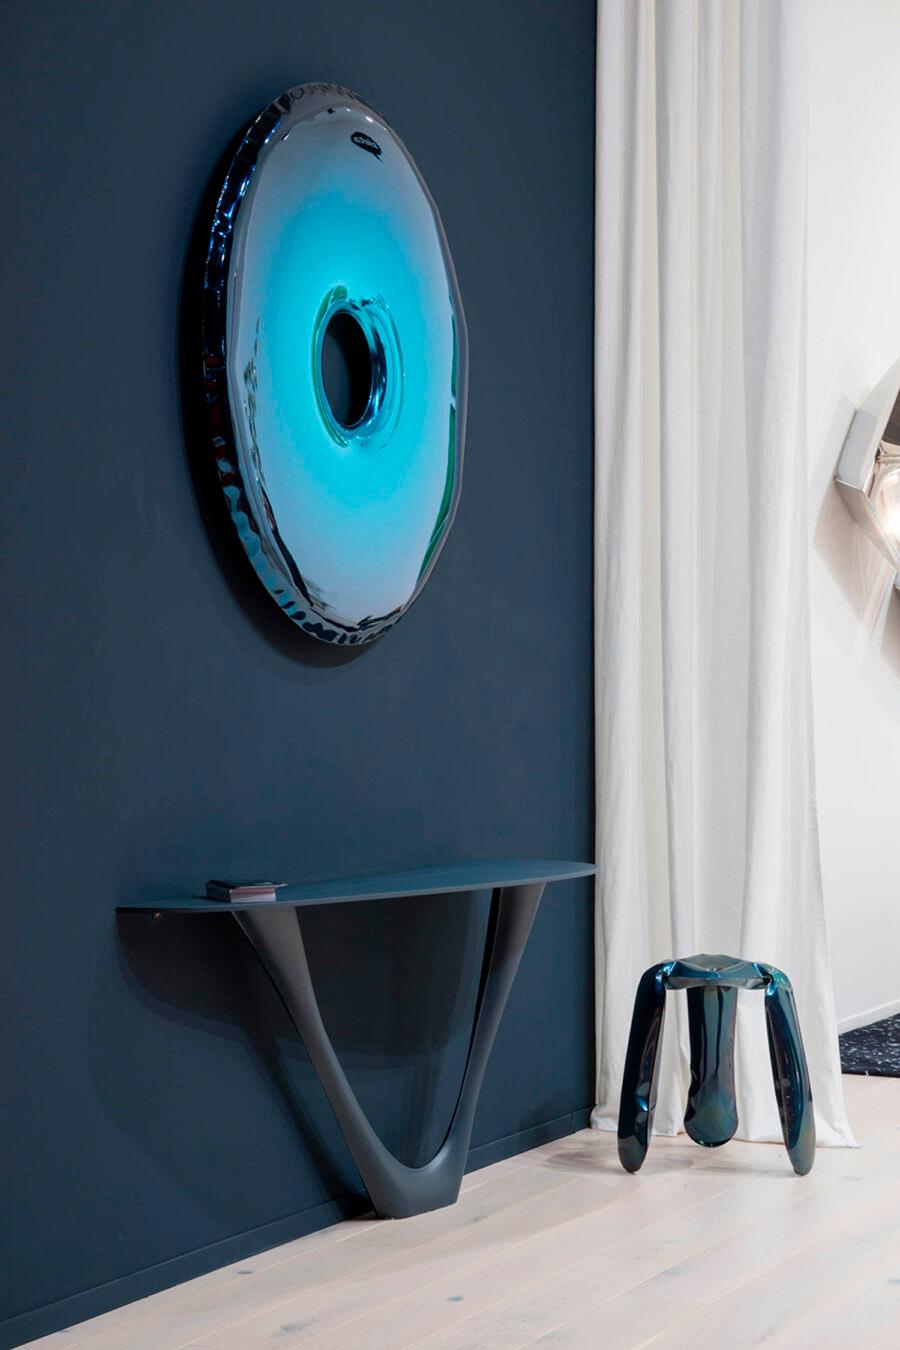 Rondo mirror 'Deep Space Blue' by Zieta Prozessdesign
Gradient collection - Deep Space Blue

Stainless steel
Measures: 95 x 6 cm.

Several sizes available: 
Diameter: 75 cm / 120 cm / 150 cm



Zieta is best known for his collection of